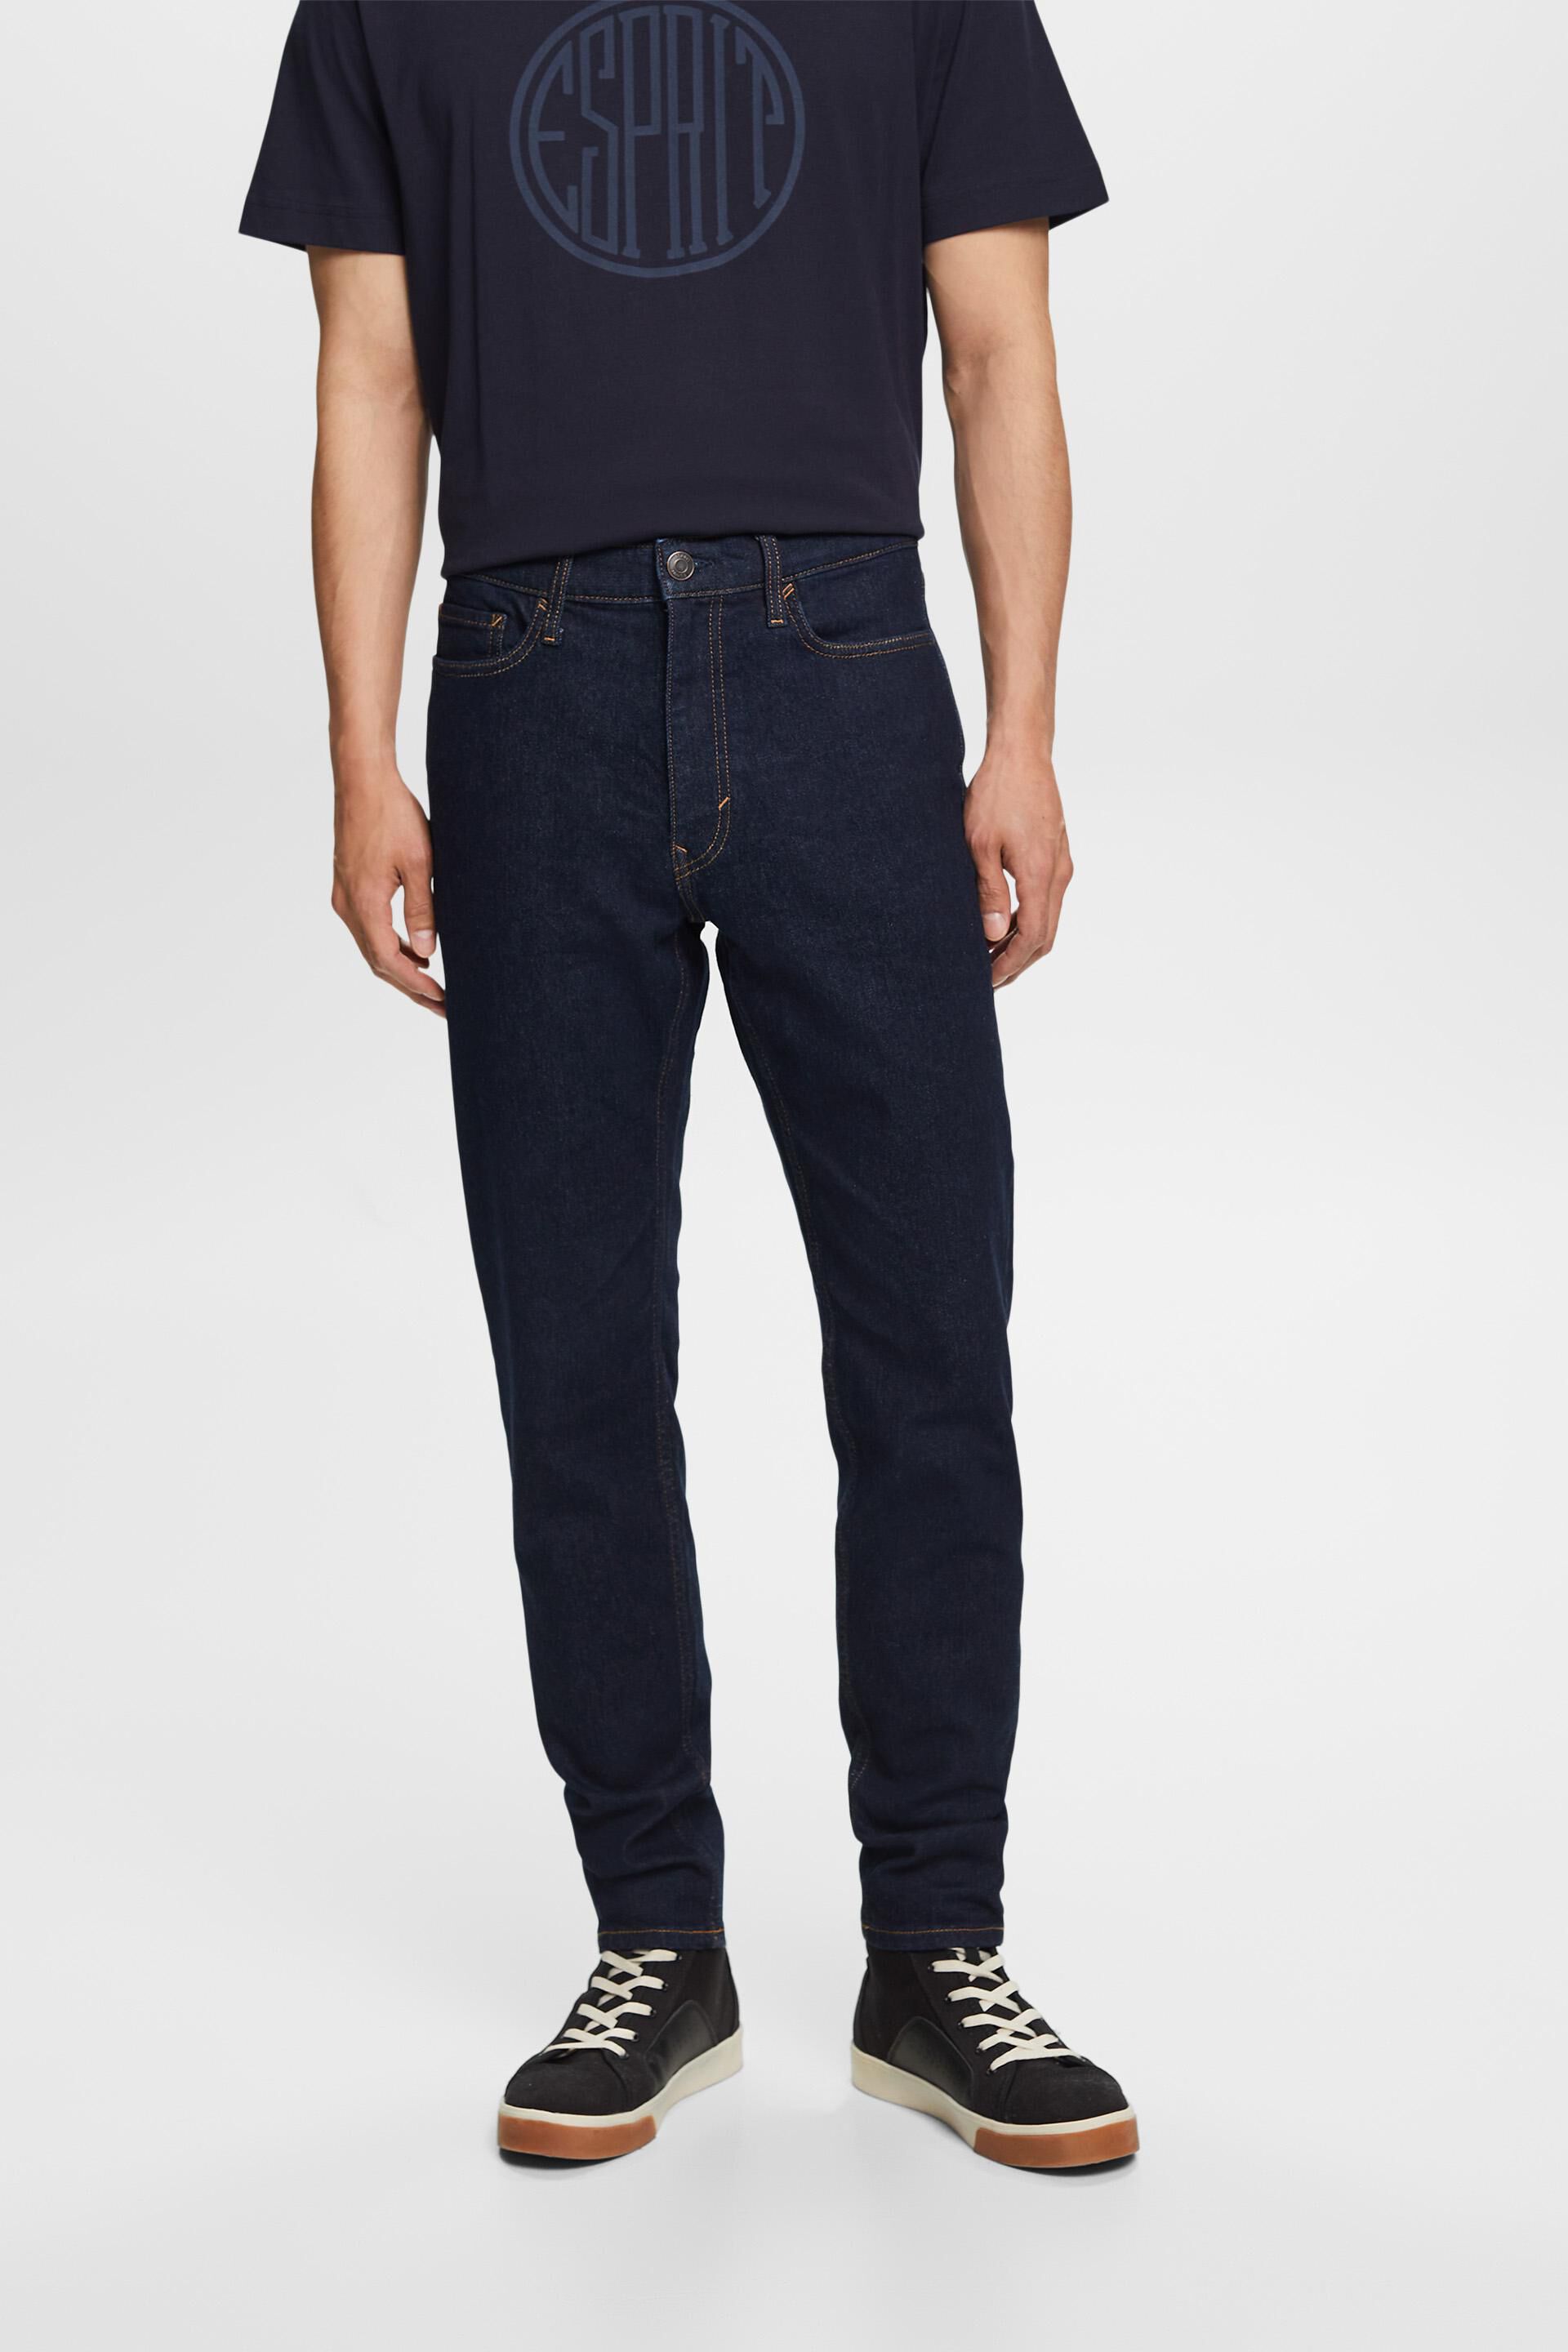 Esprit jeans fit Tapered